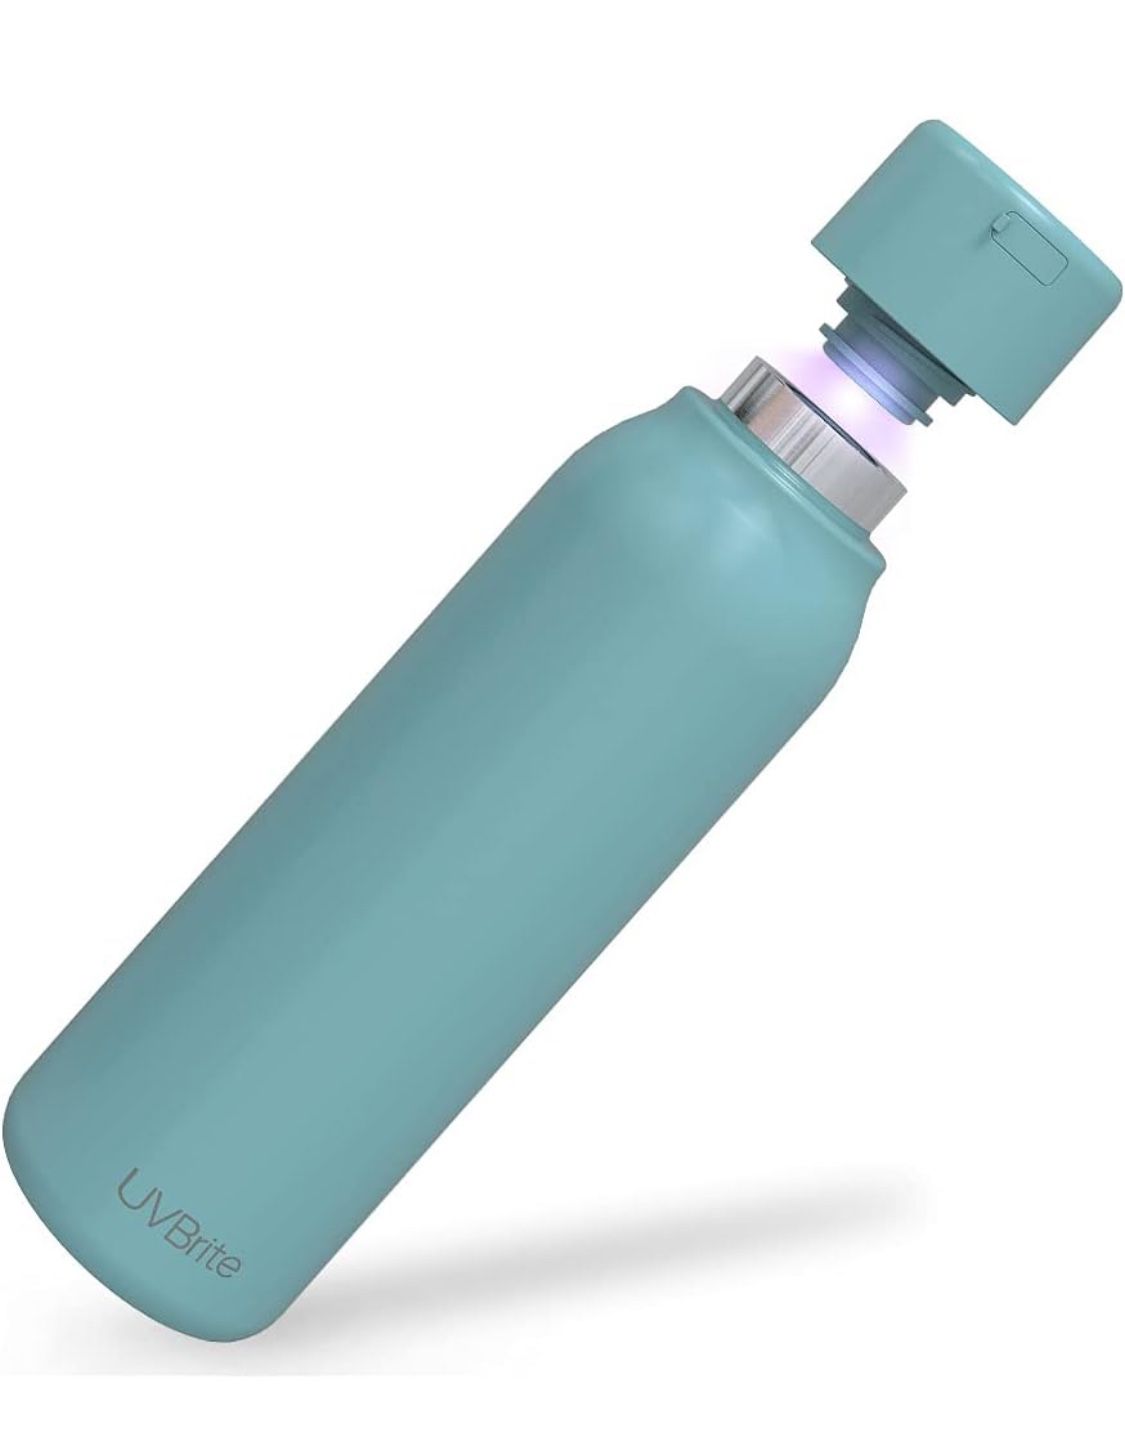 Self-Cleaning UV Water Bottle - 18.6 oz Insulated Stainless-Steel Rechargeable & Reusable Purifying Bottle - Sterilization & Travel-Friendly - BPA Fre